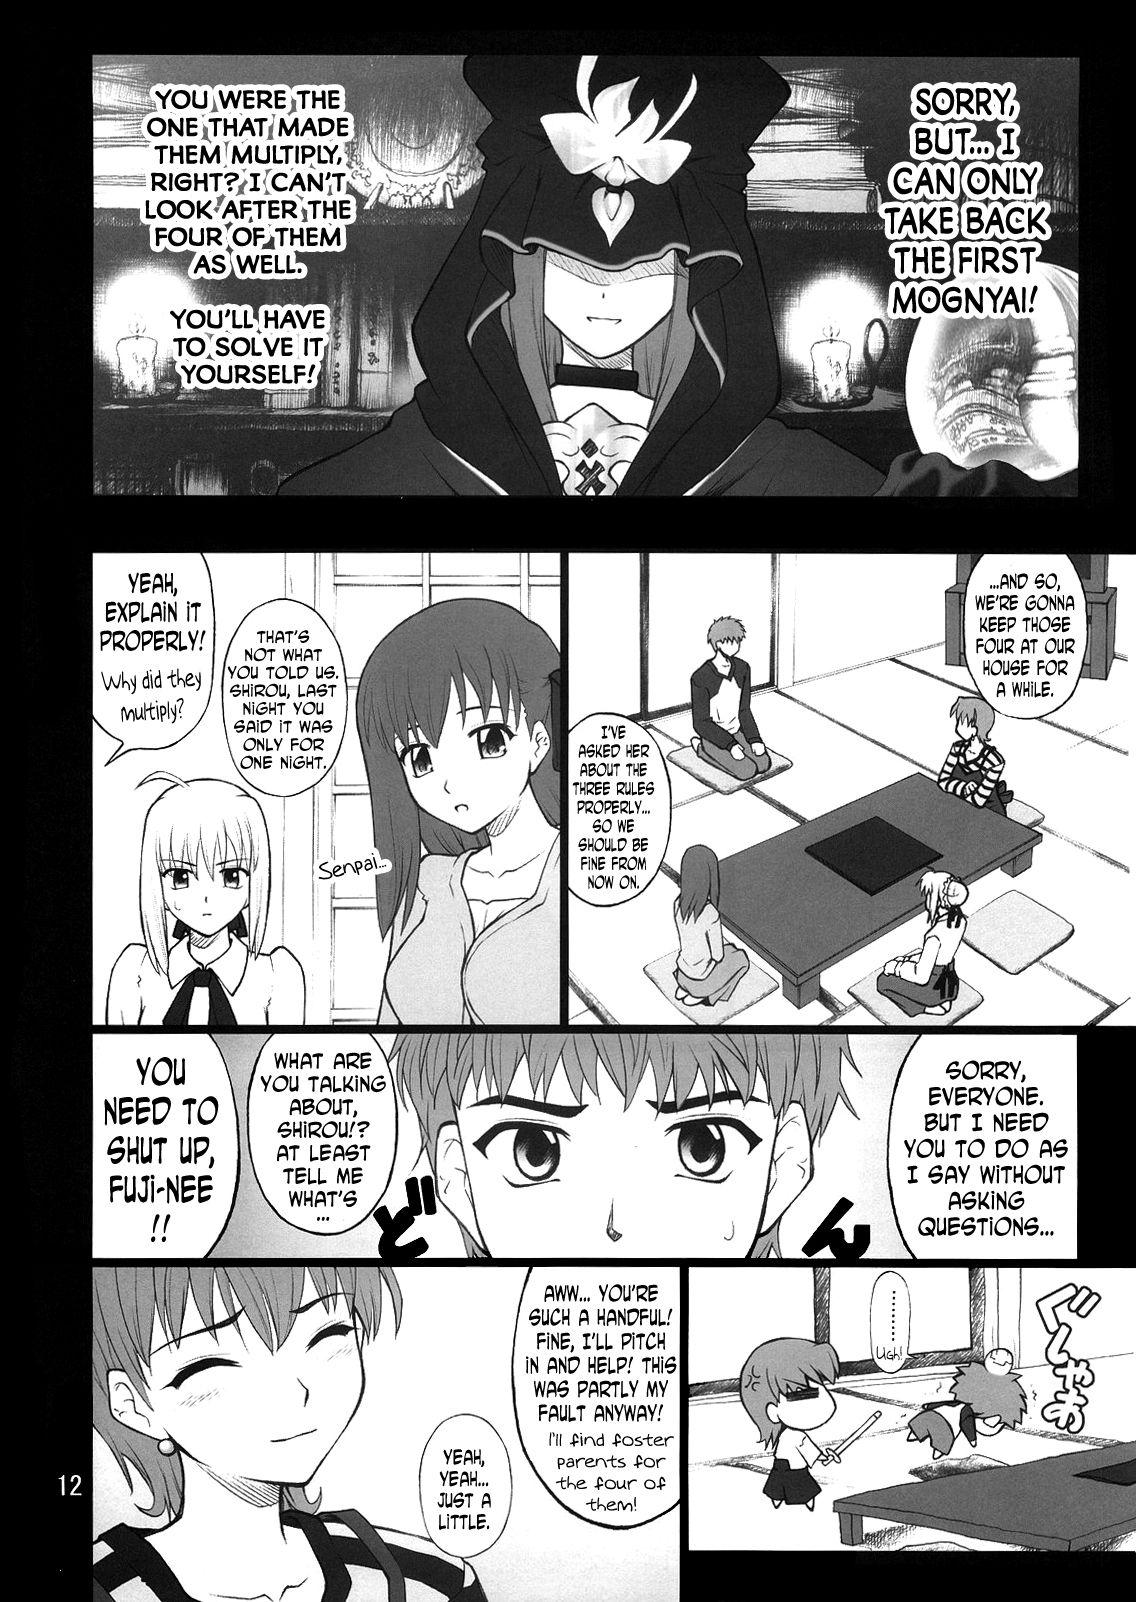 College Grem-Rin 2 - Fate stay night Bear - Page 11